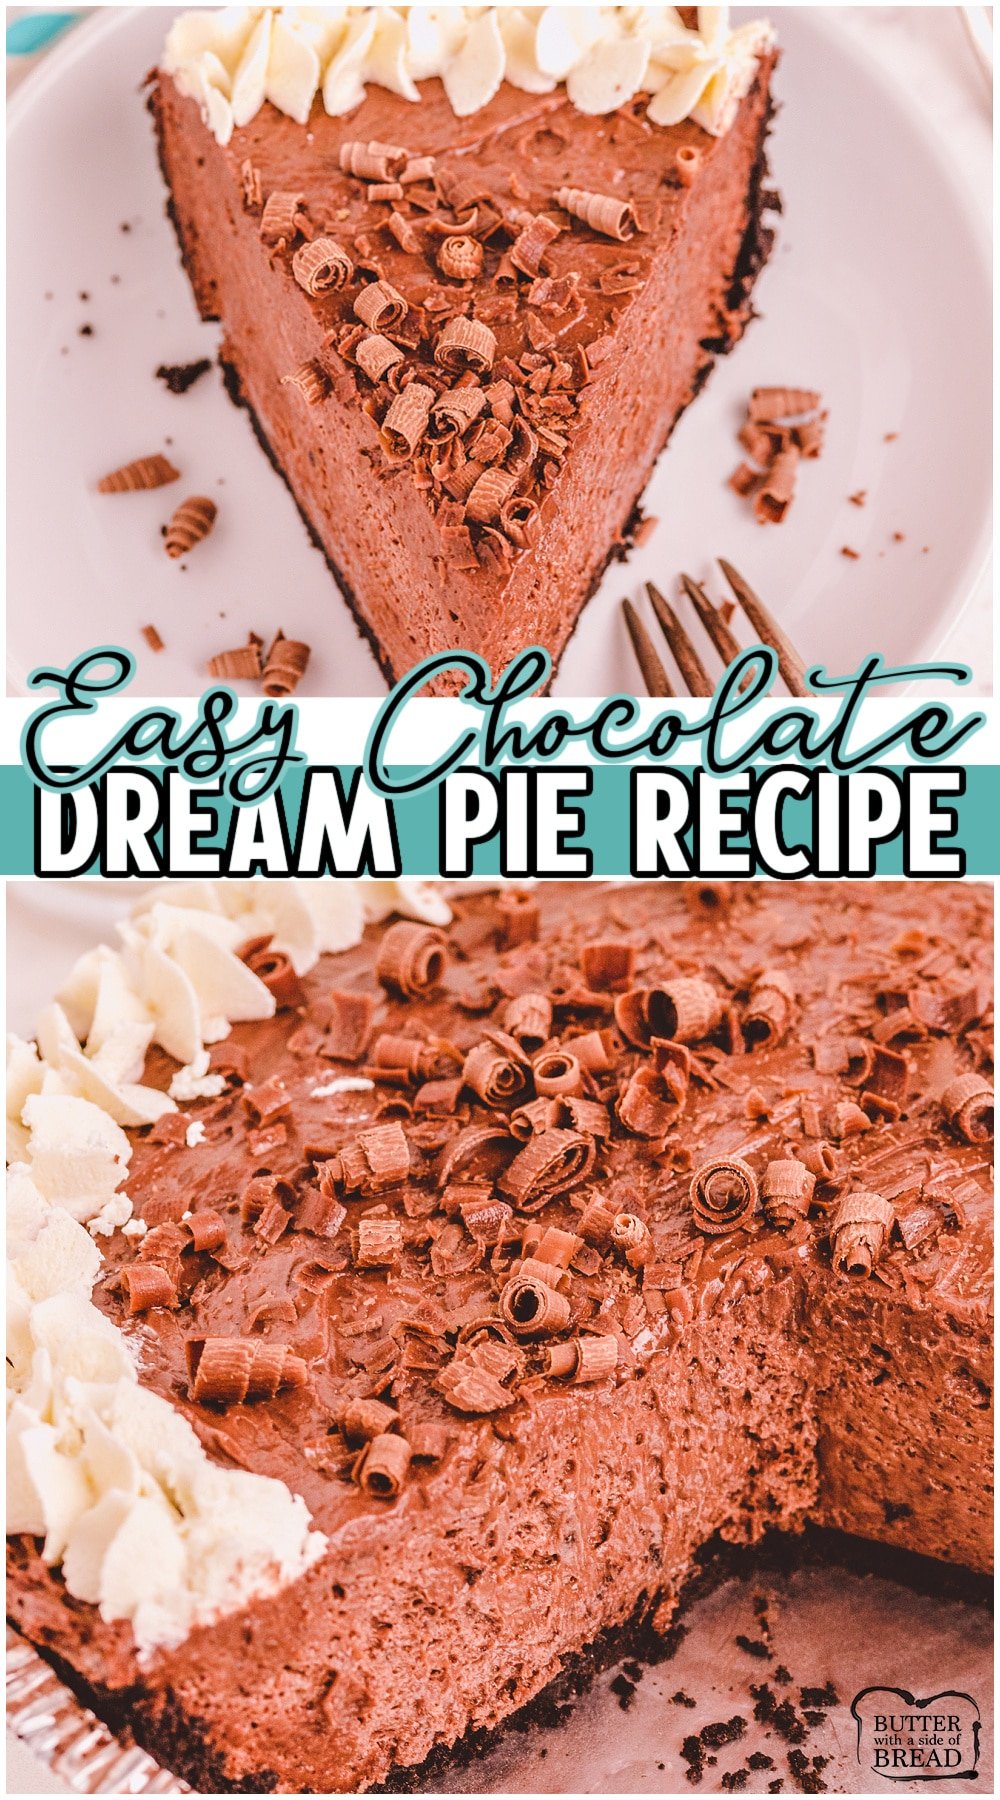 Chocolate Dream Pie is a delicious creamy chocolate pie with an Oreo crust & topped with chocolate curls & whipped cream! Made in just minutes flat, this is a great go-to dessert when you need something quick & easy!